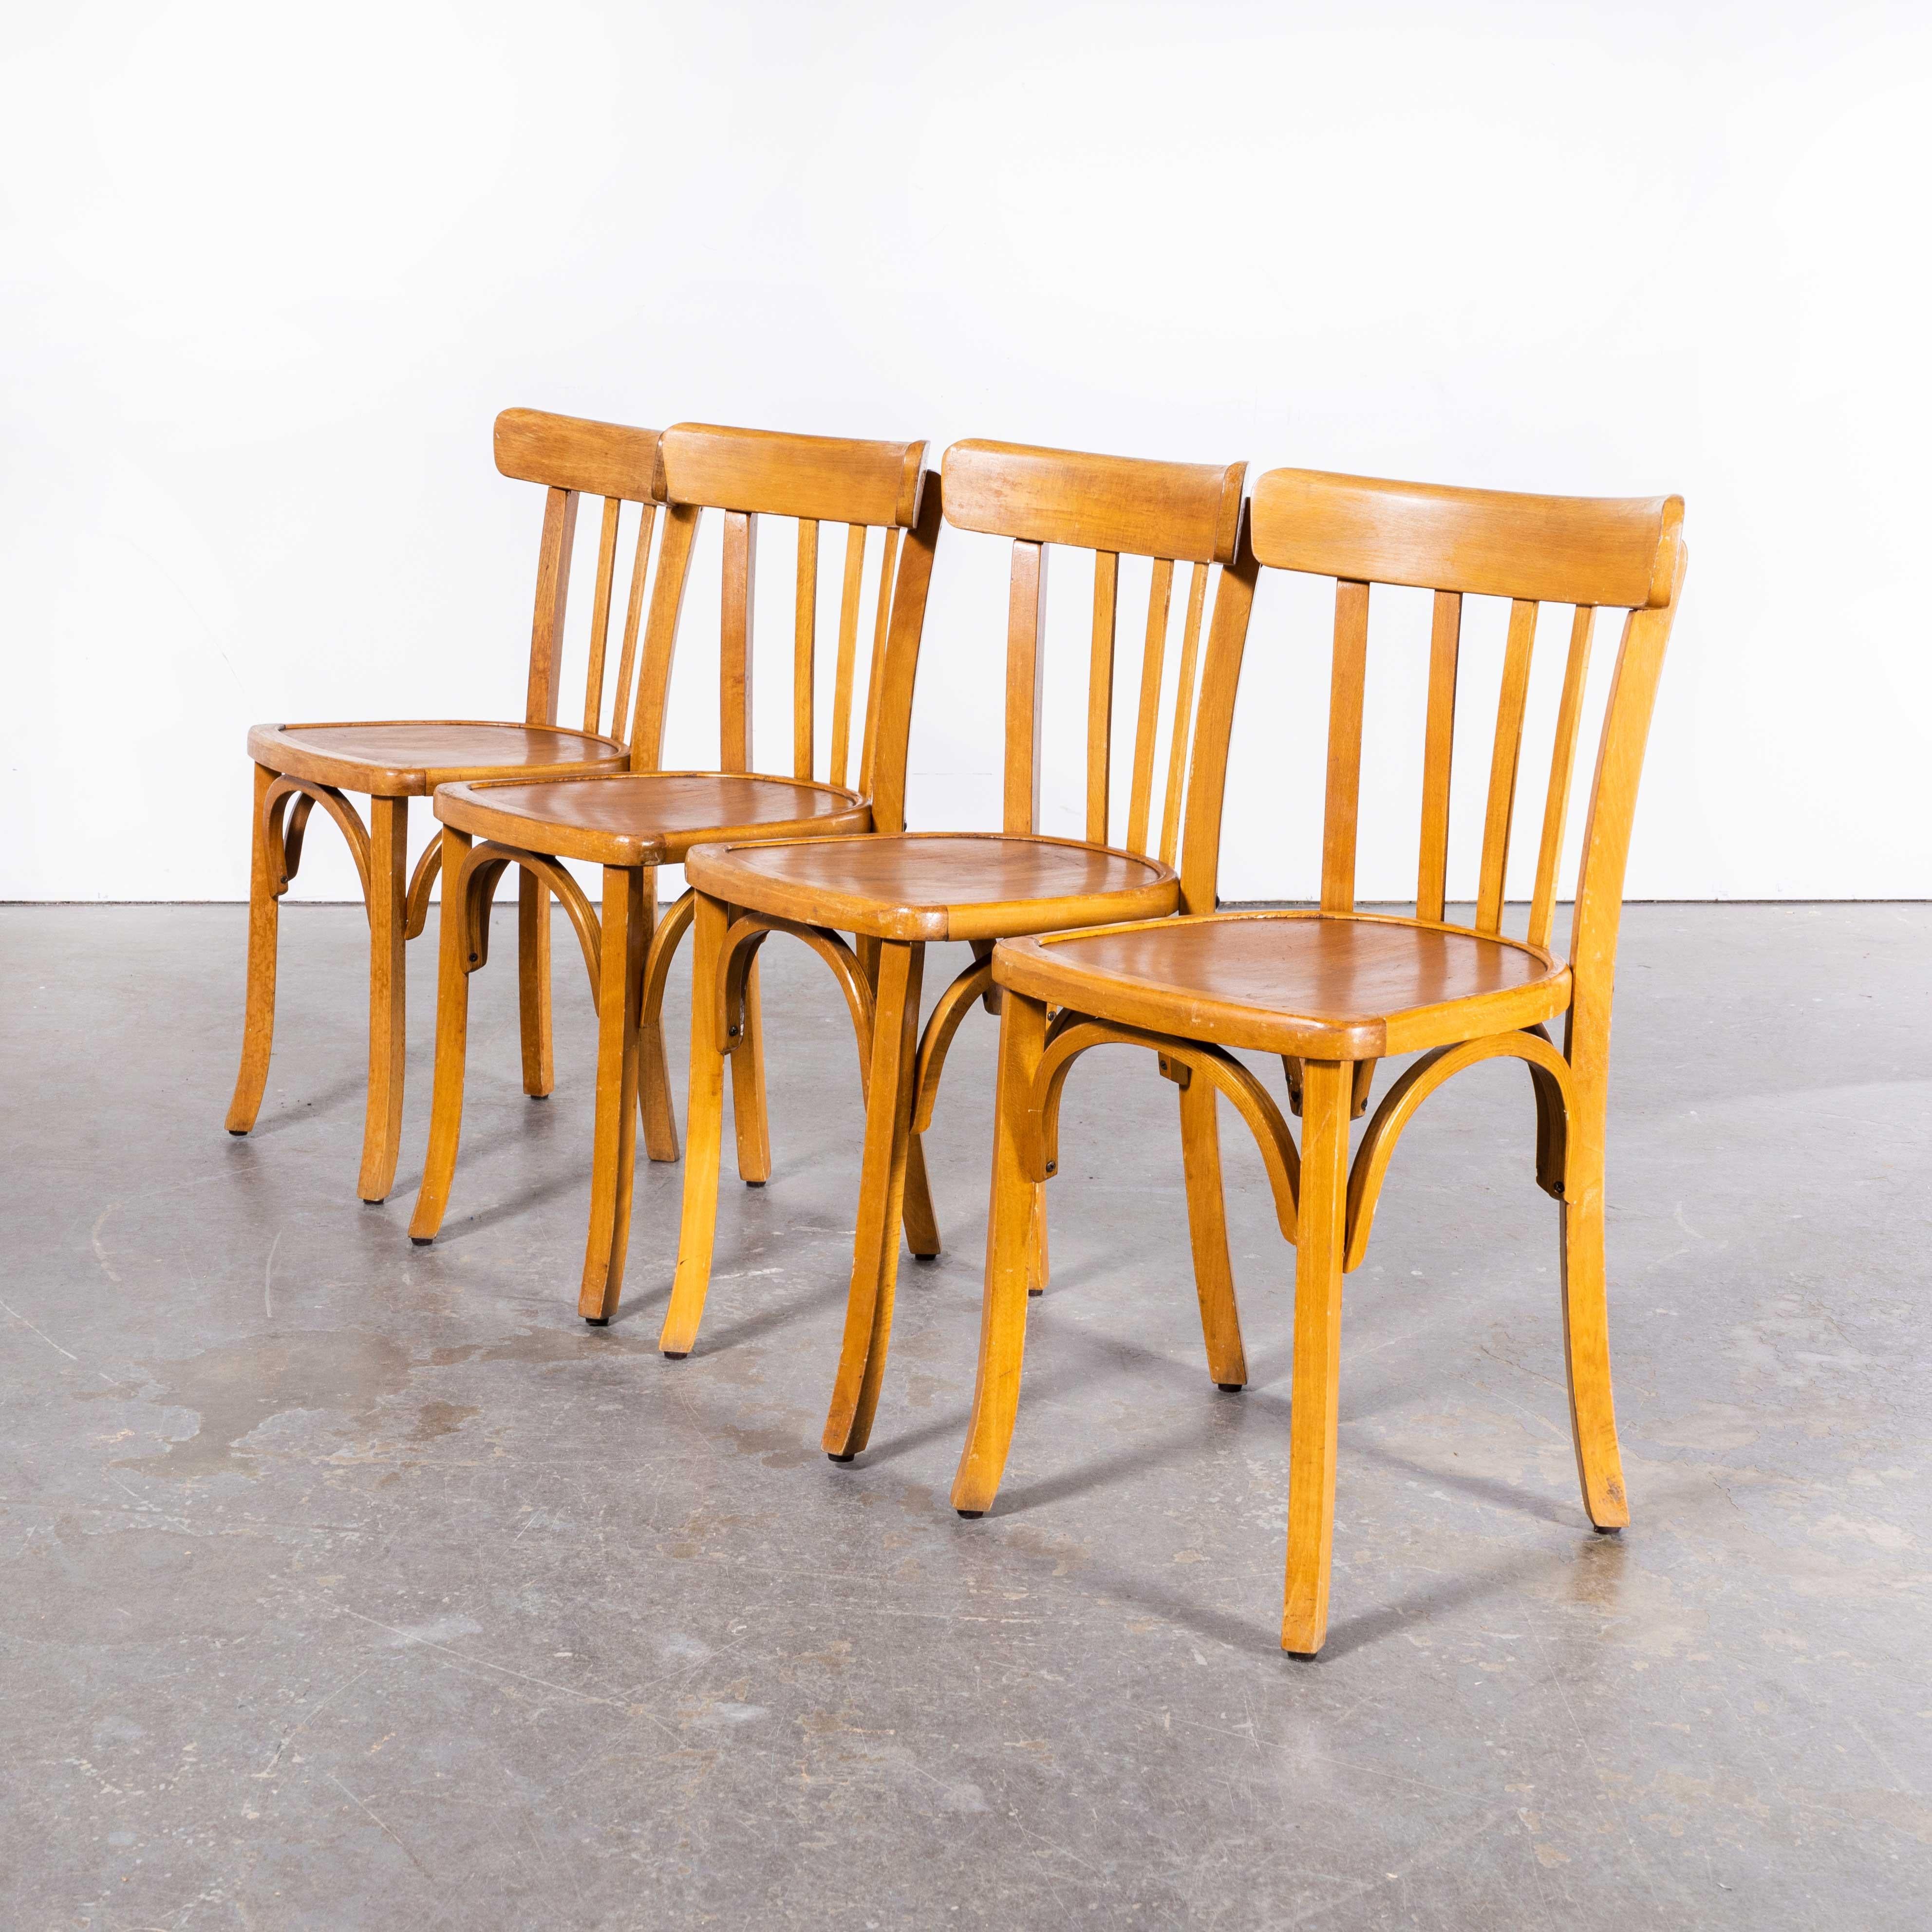 1950s Luterma Honey Oak Bentwood Dining Chair - Set of Four For Sale 2